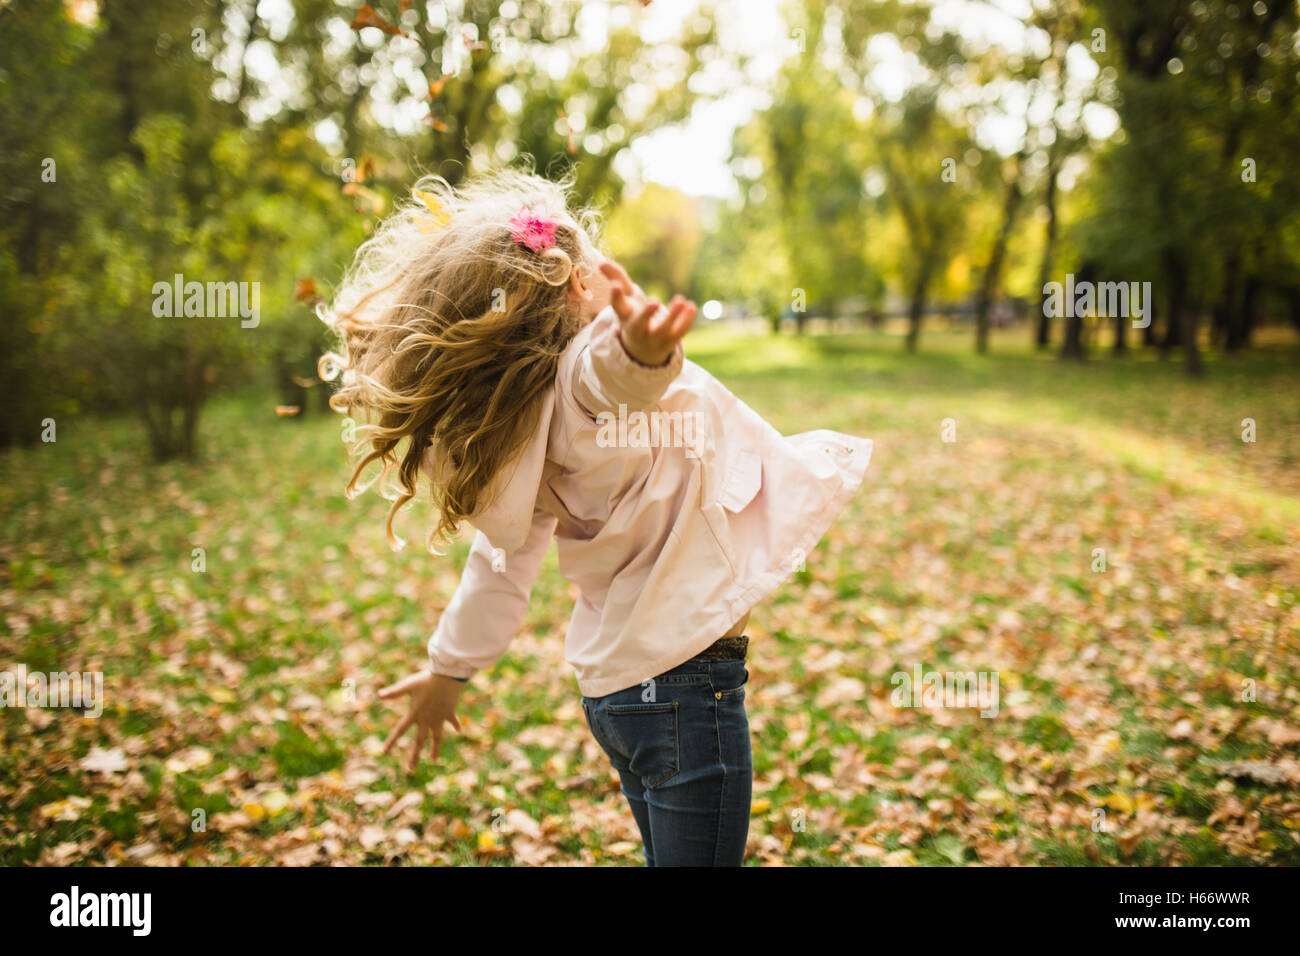 Happy child girl in autumn park Banque D'Images